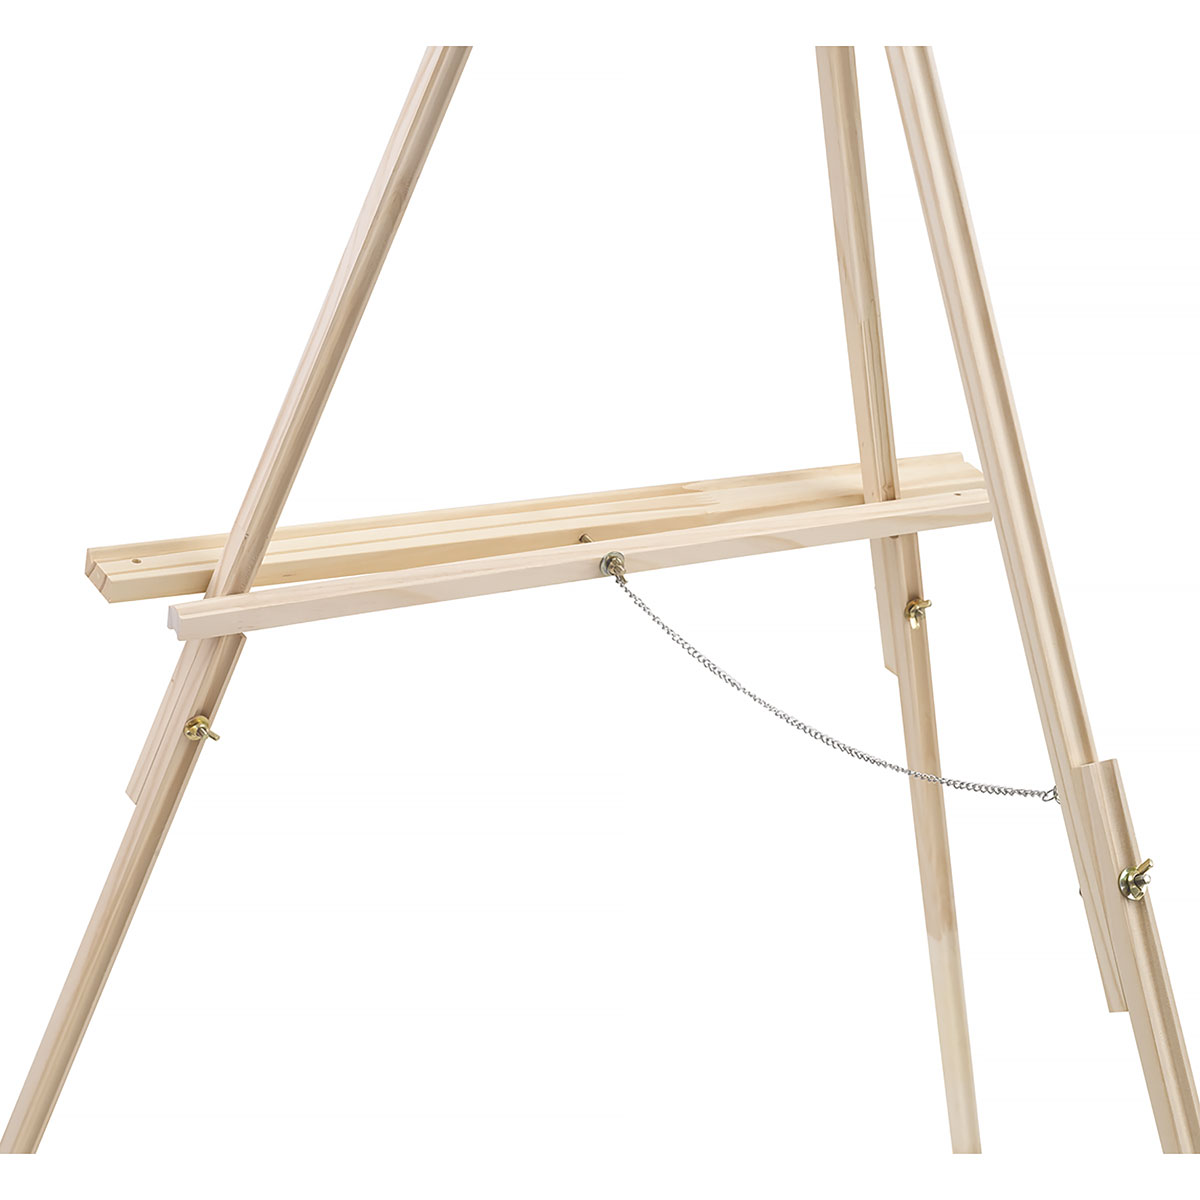 WOODEN EASEL STAND > 71 Tall Wooden Tripod Easel Display Floor